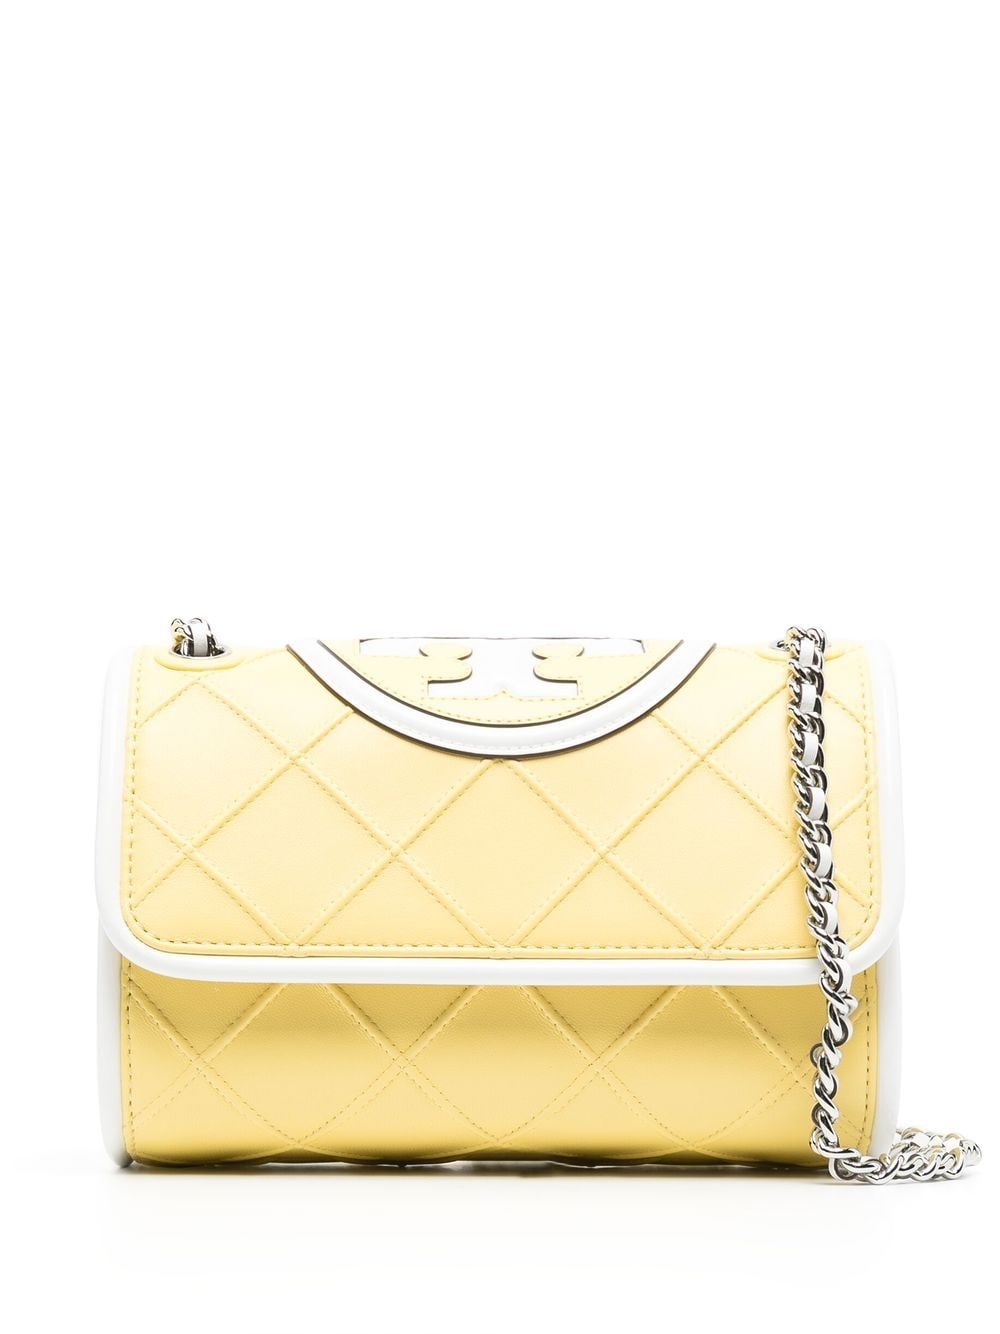 Tory Burch embossed and quilted cross-body bag - Yellow von Tory Burch